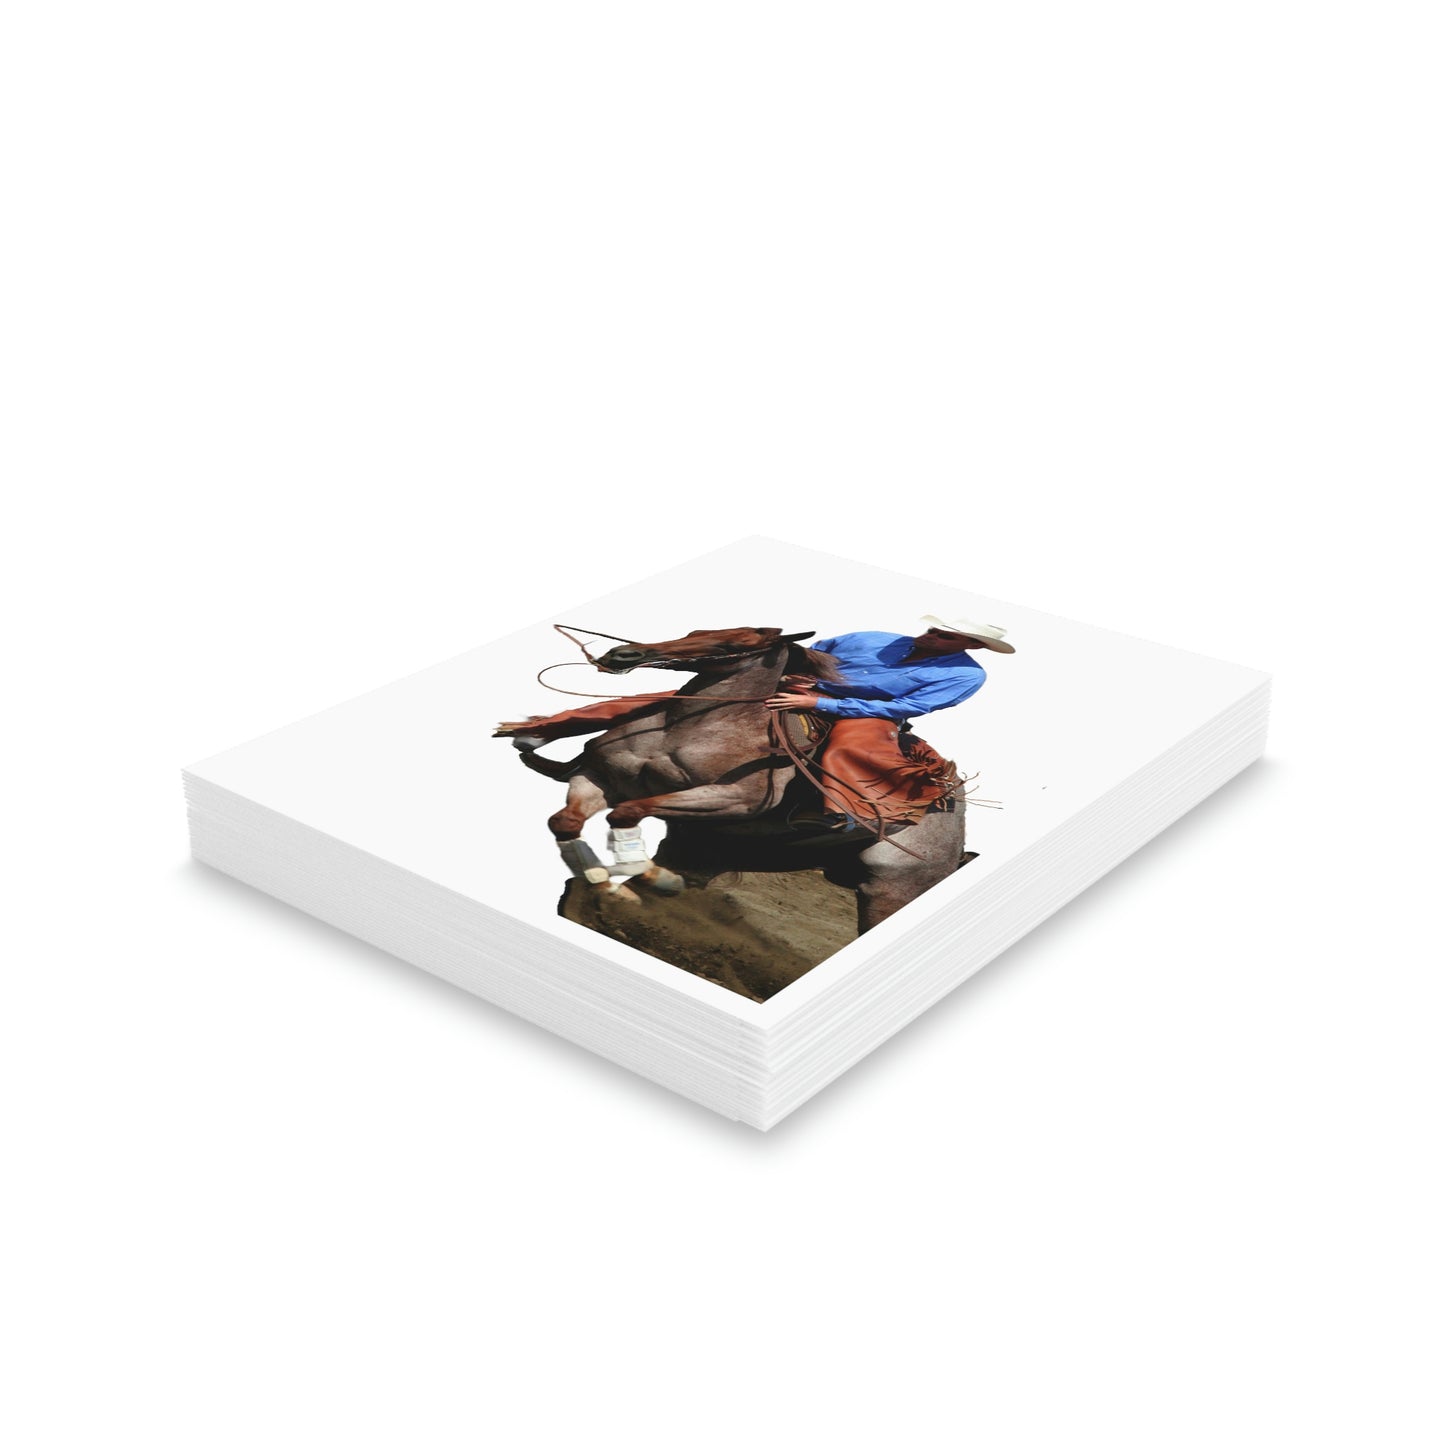 Cutting Horse Team. Quarter Horse    Greeting cards (8, 16, and 24 pcs)